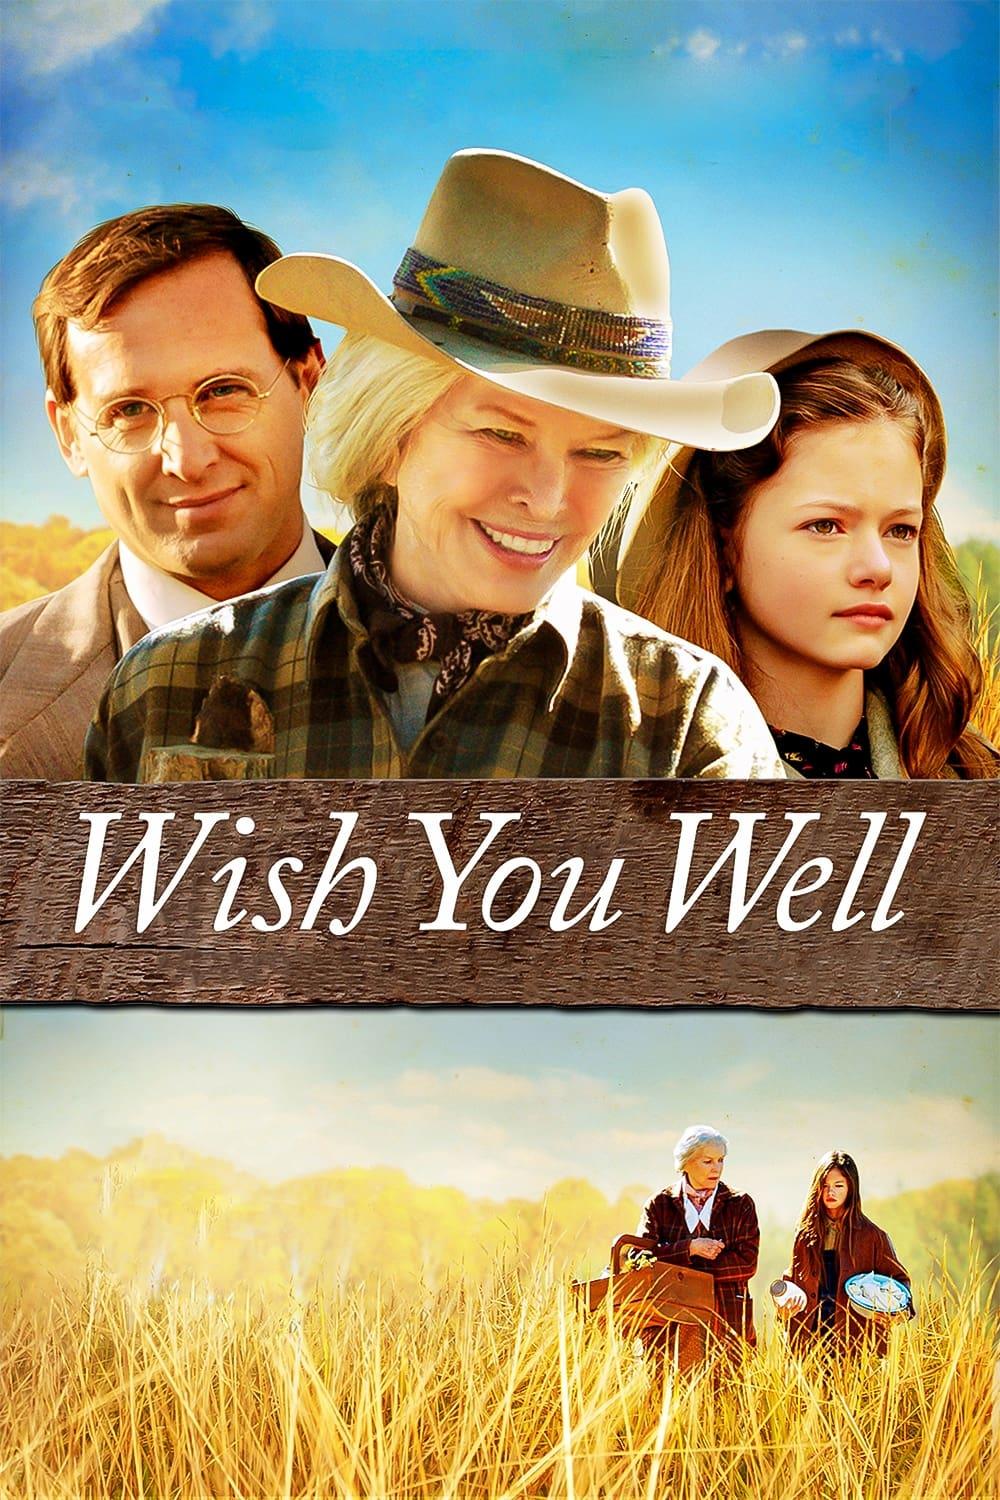 Wish You Well poster